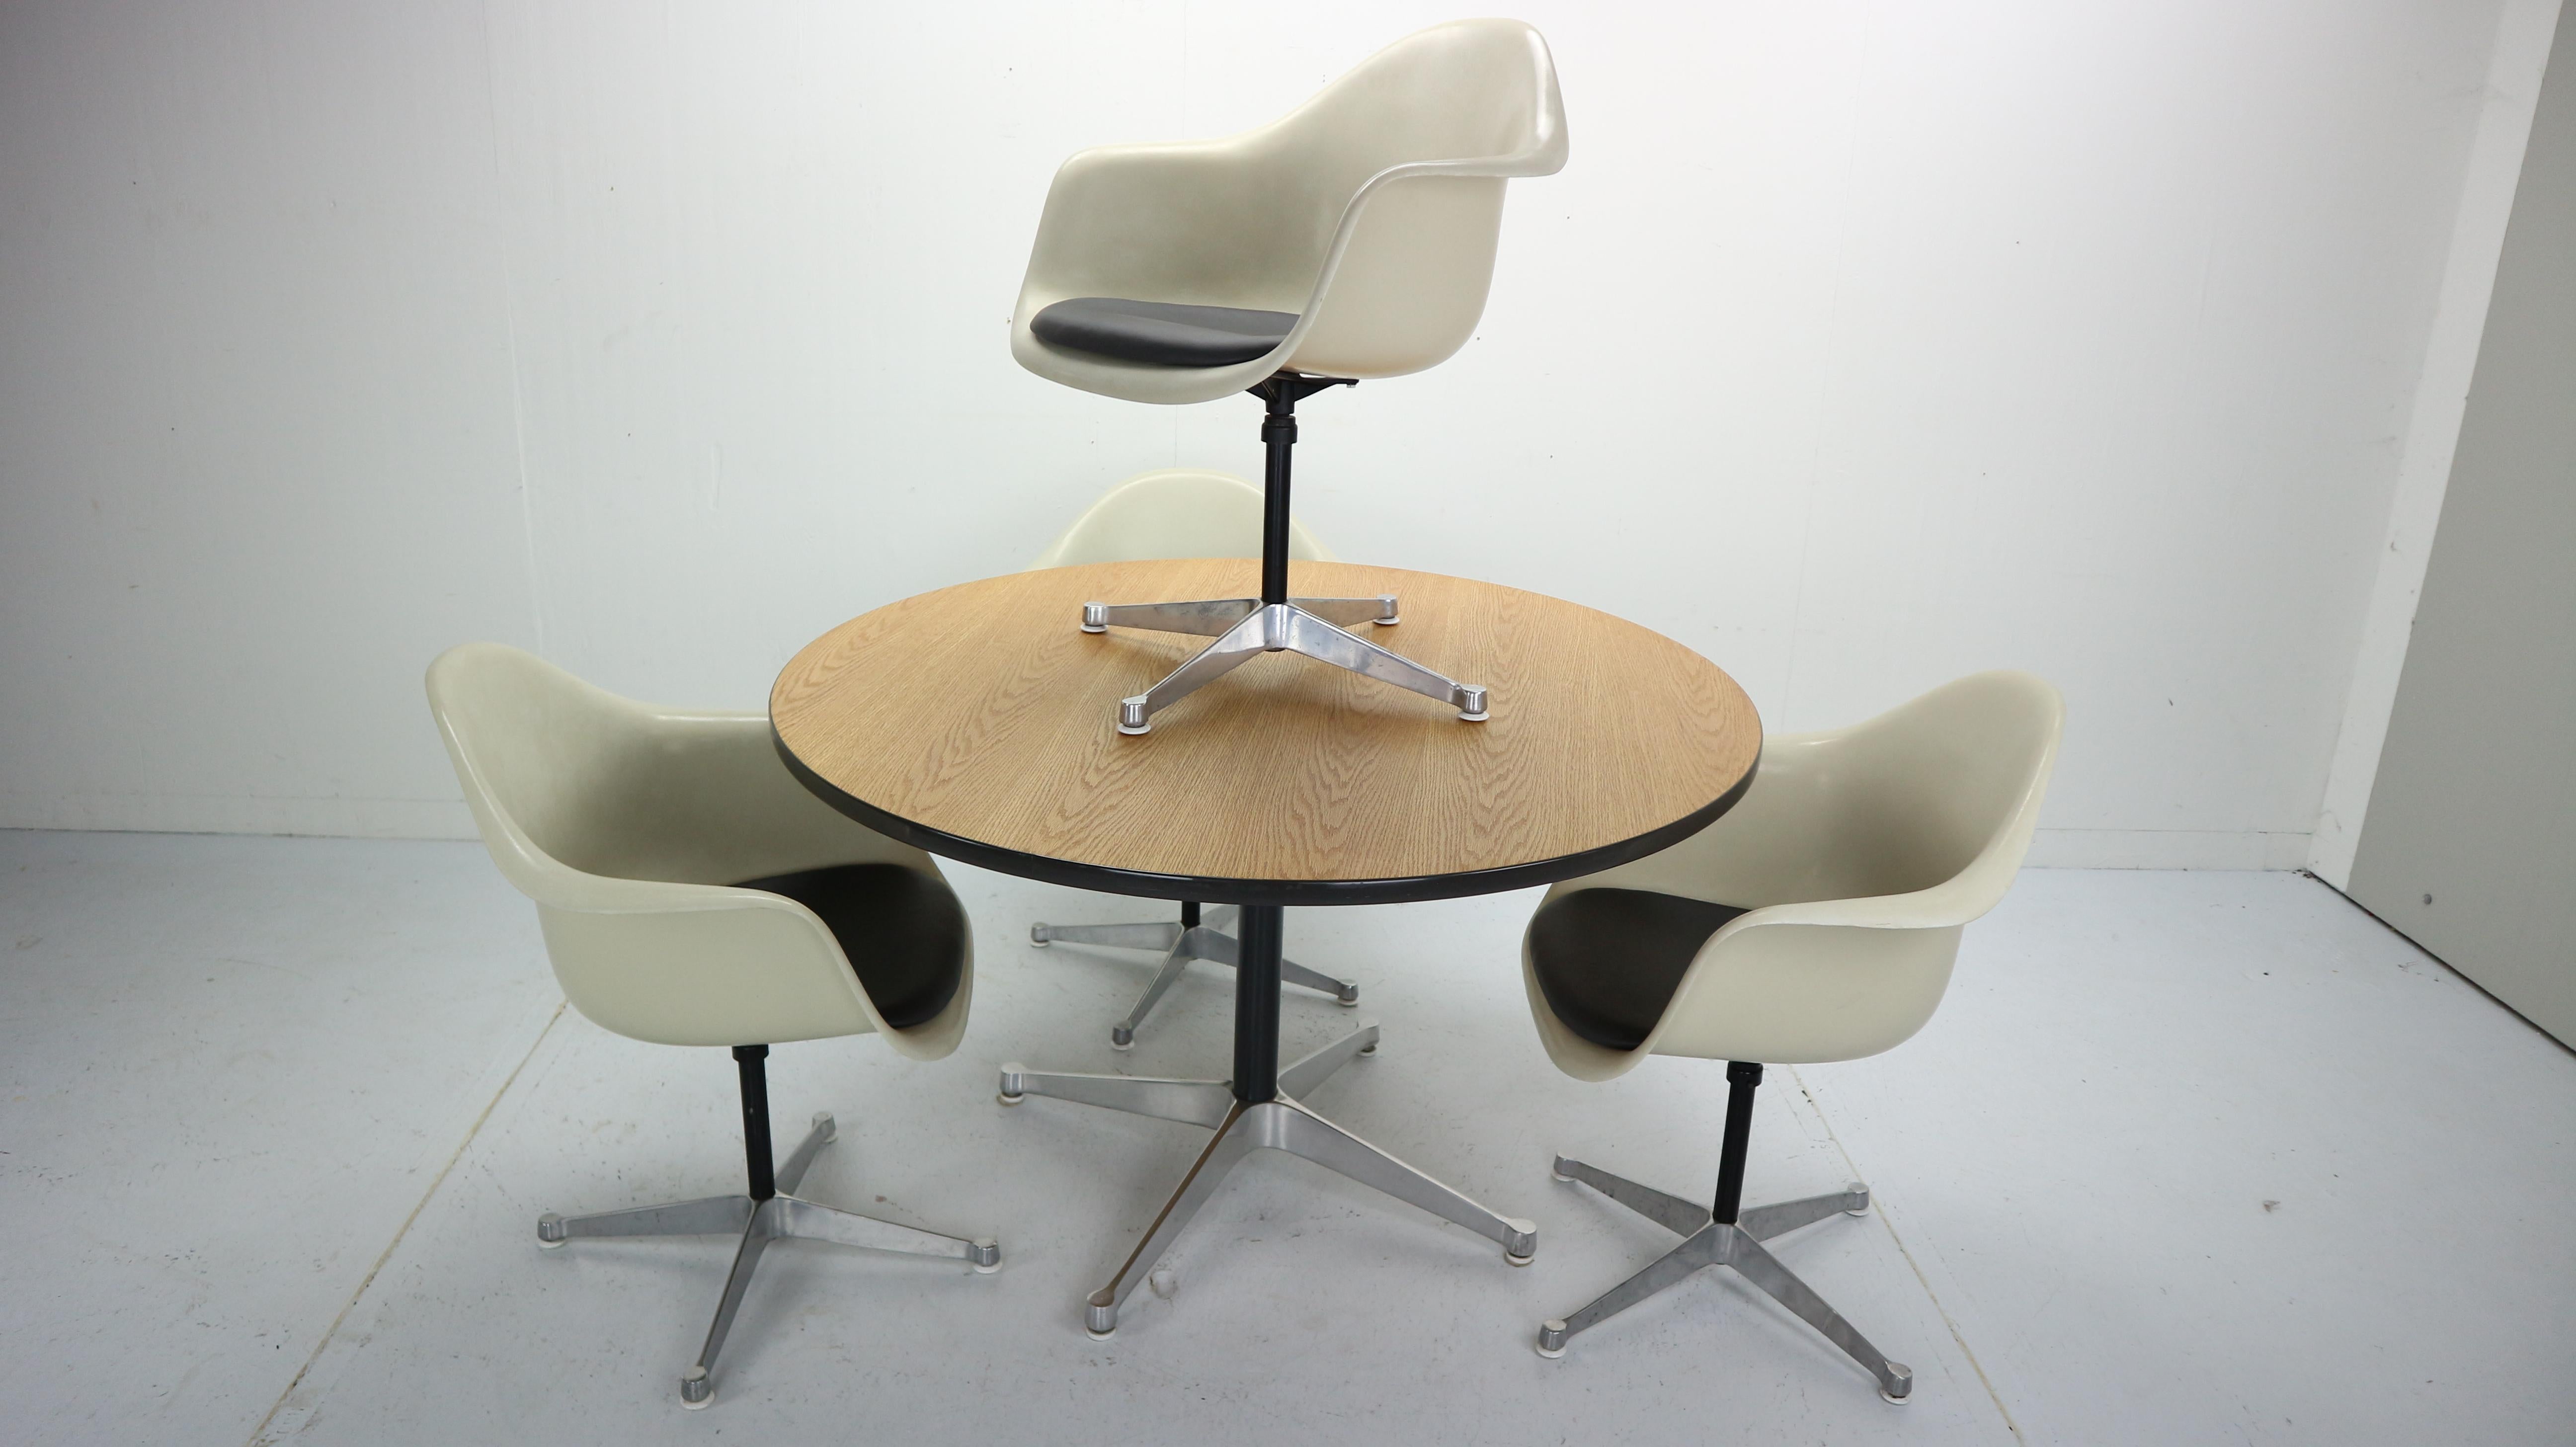 Gorgeous set of 4 bucket swivel chairs and round dining room table design by Charles and Ray Eames and manufactured by Herman Miller in 1950s-1960s period.
Charles and Ray Eames had ideas about making a better world, one in which things were